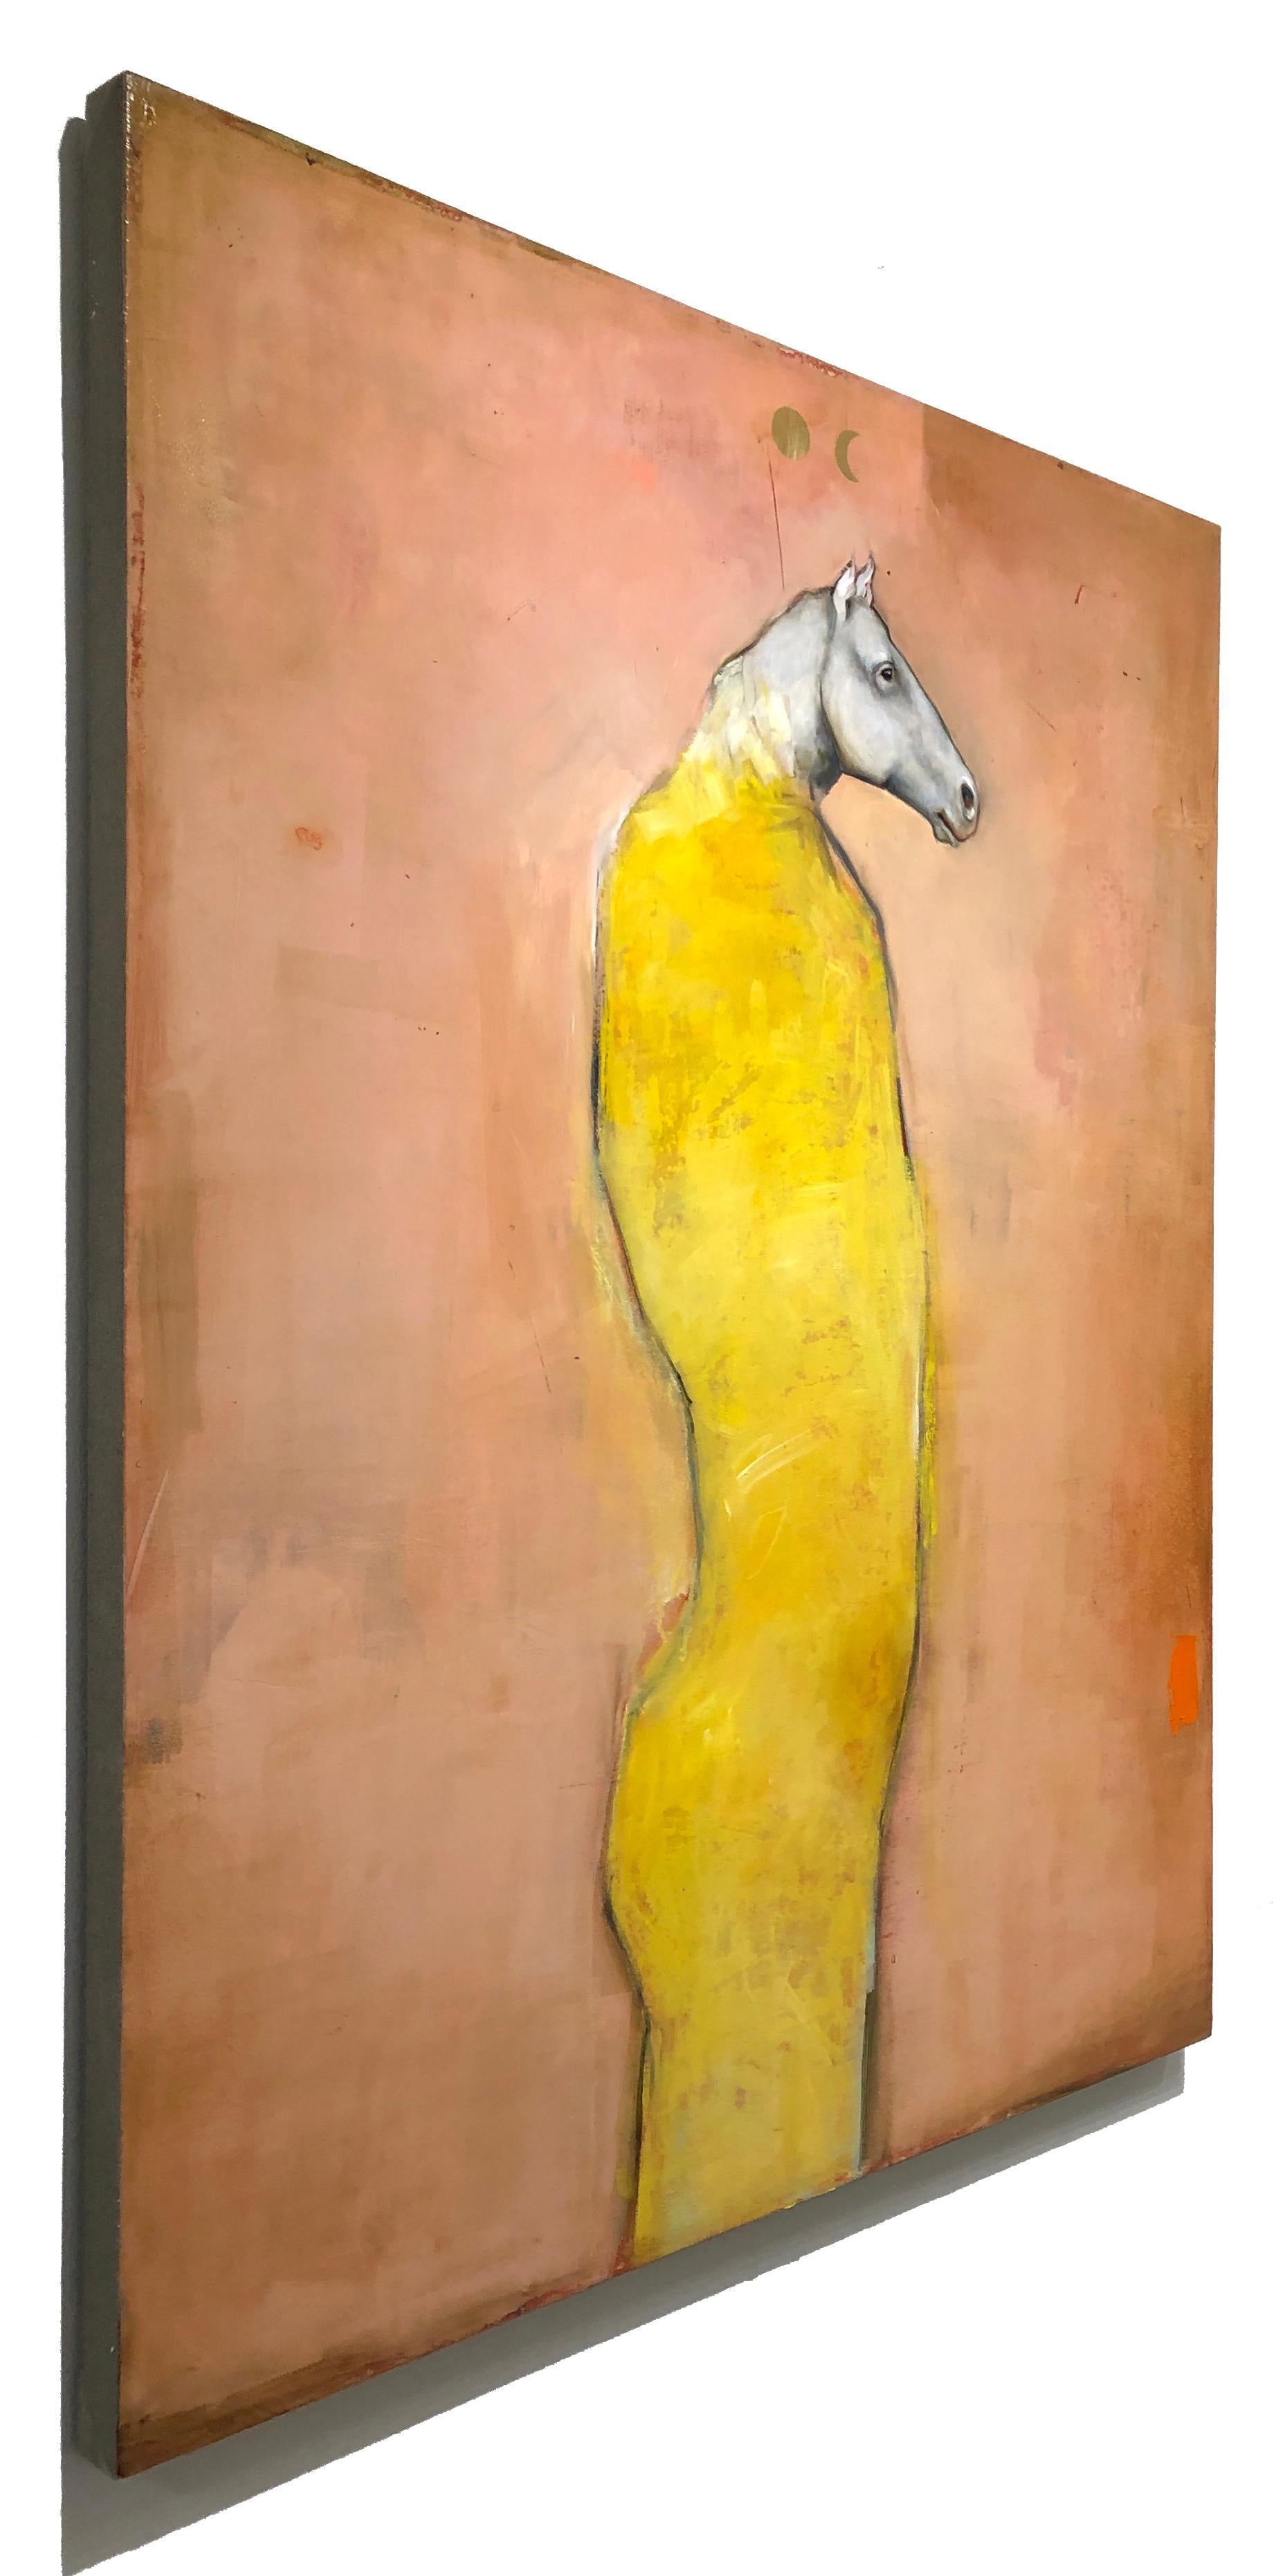 Eos -Mythical horse figure, Oil on canvas, pop contemporary whimsical painting - Pop Art Painting by Michele Mikesell